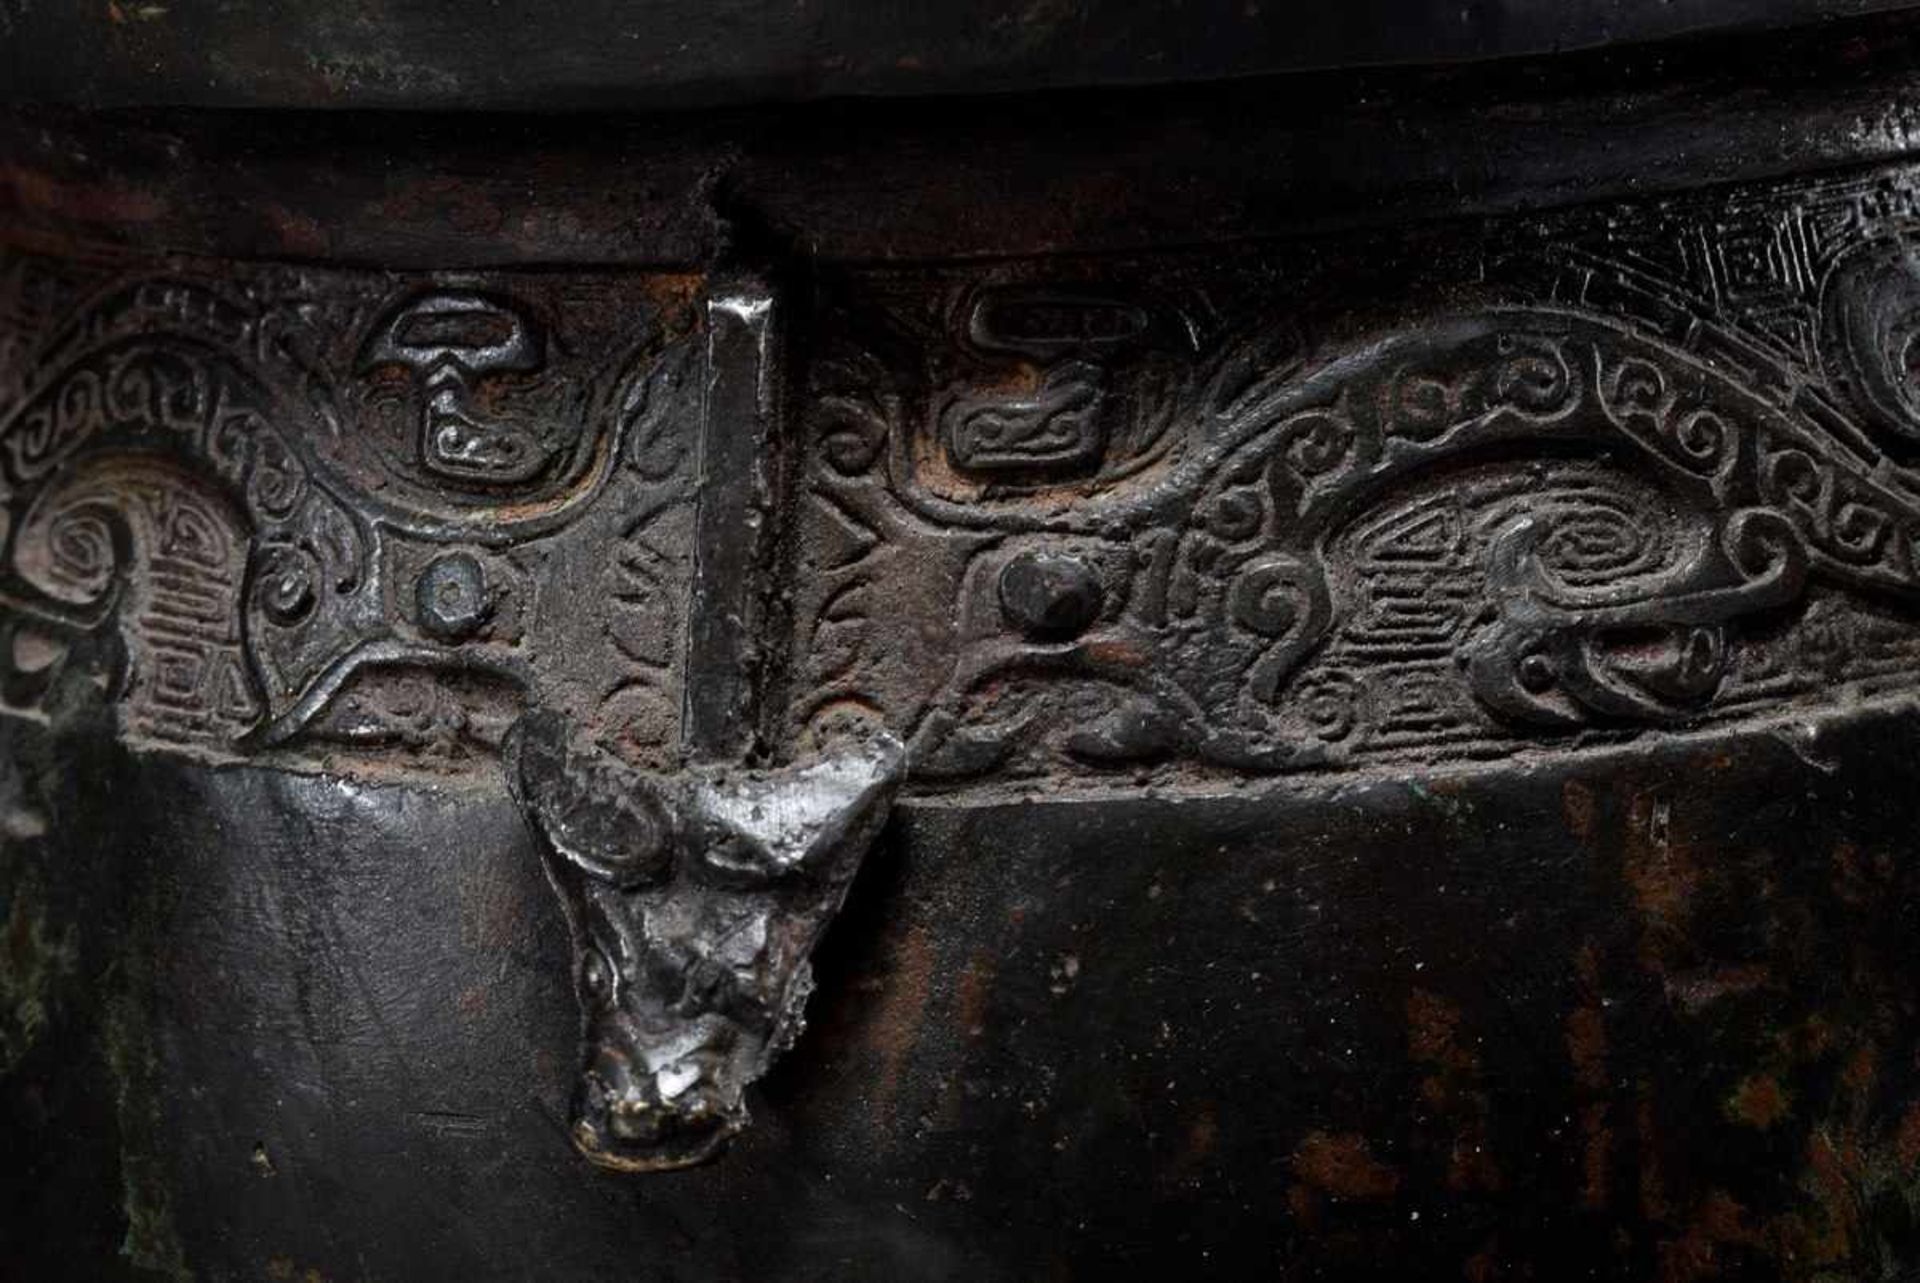 Bronze ritual vessel of the type "Ding" with archaic ornamental frieze on 3 legs, China 18th/19th - Image 4 of 10